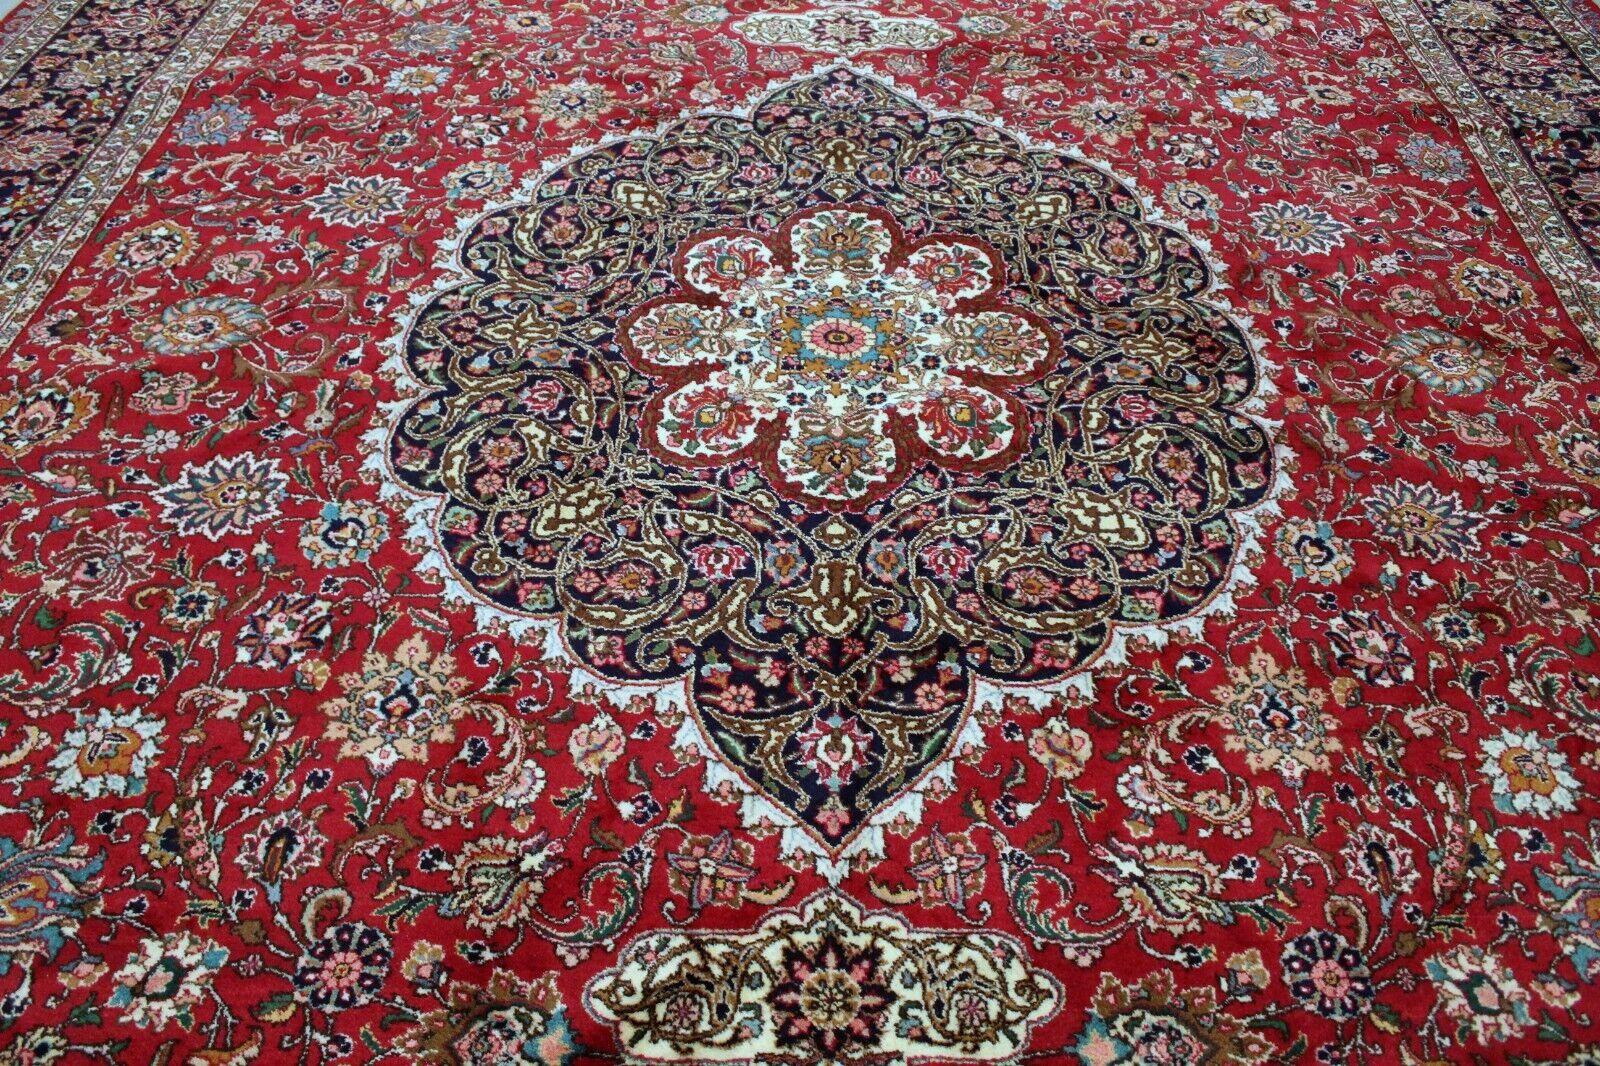 Hand-Knotted Handmade Vintage Persian Style Tabriz Oversize Rug 12.3' x 20.6', 1960s - 1K47 For Sale